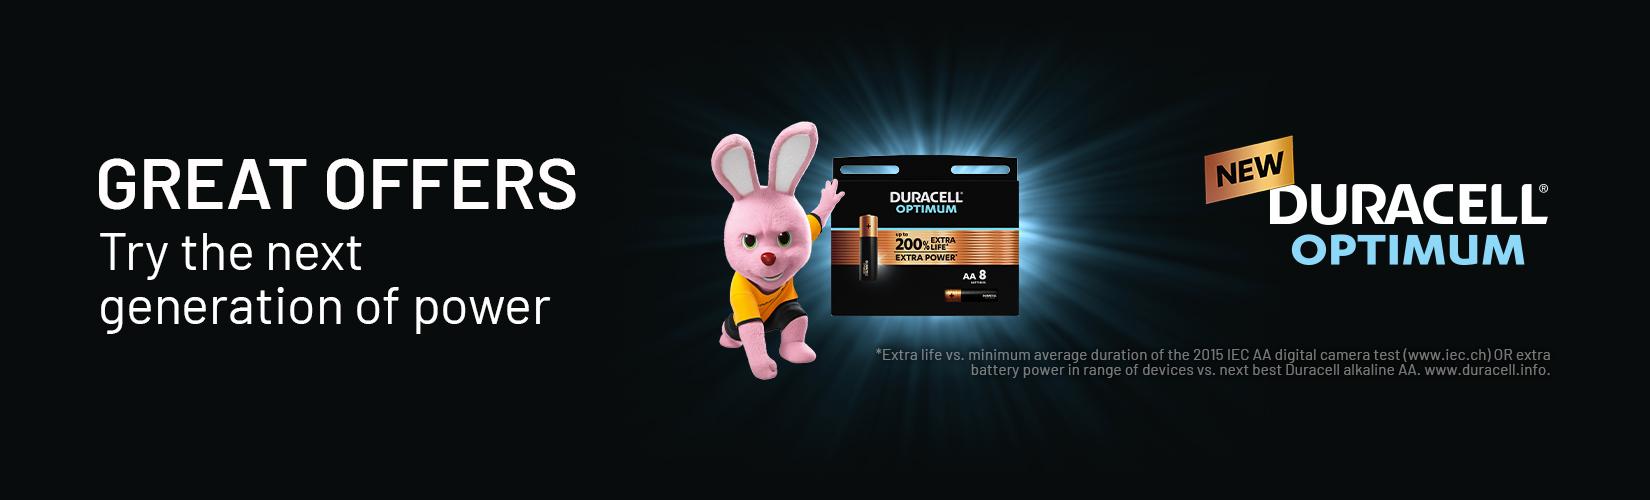 Duracell Optimum. Great offers. Try the next generation of power.